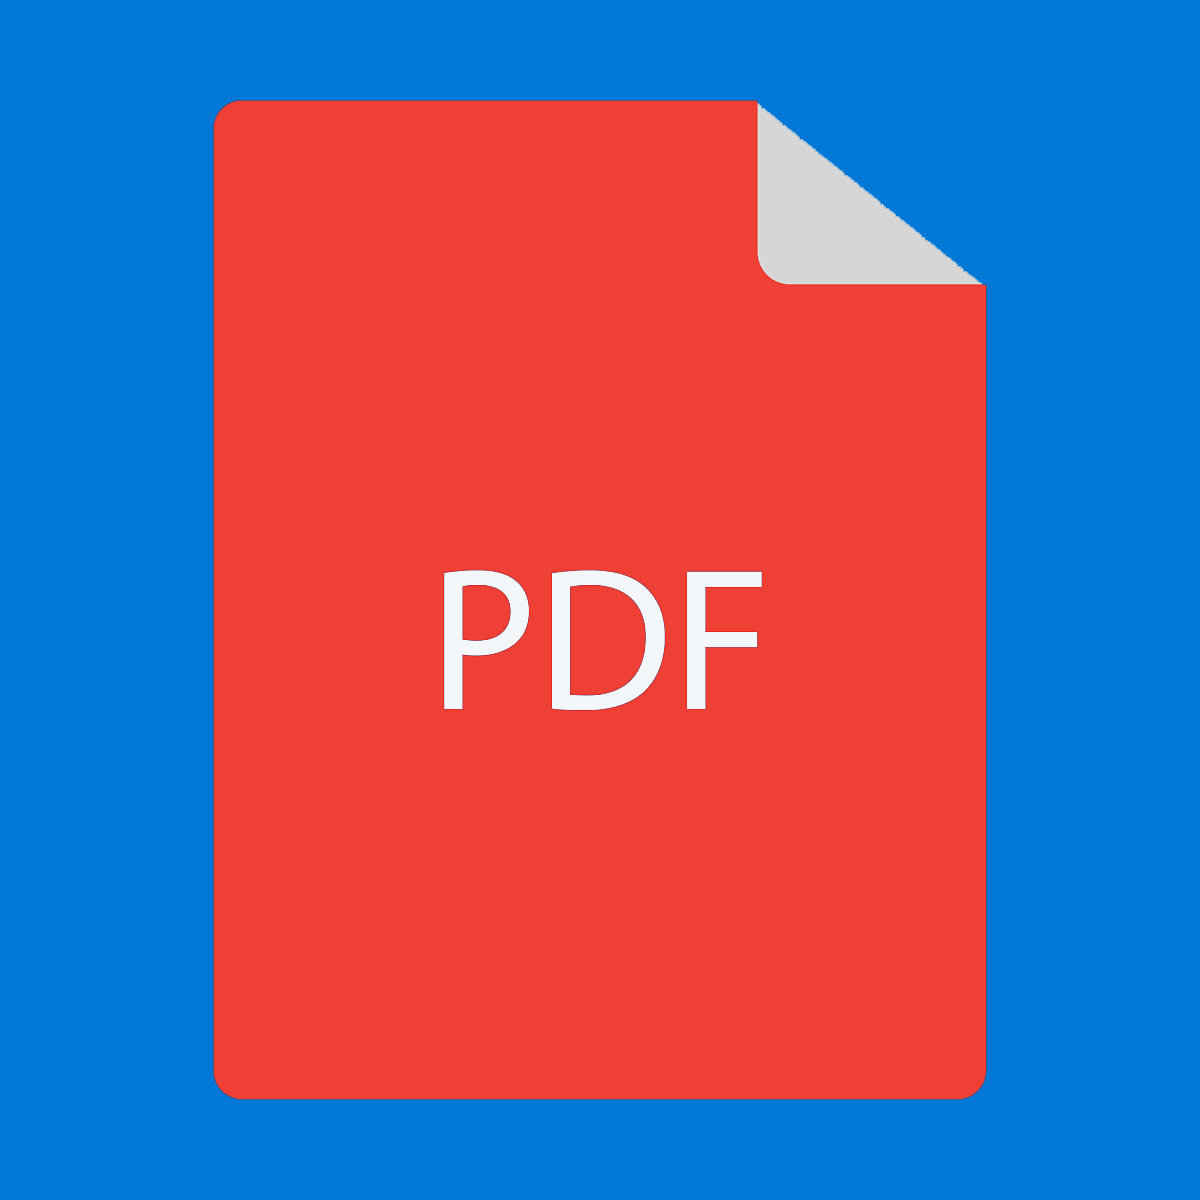 how to convert a vce file to pdf